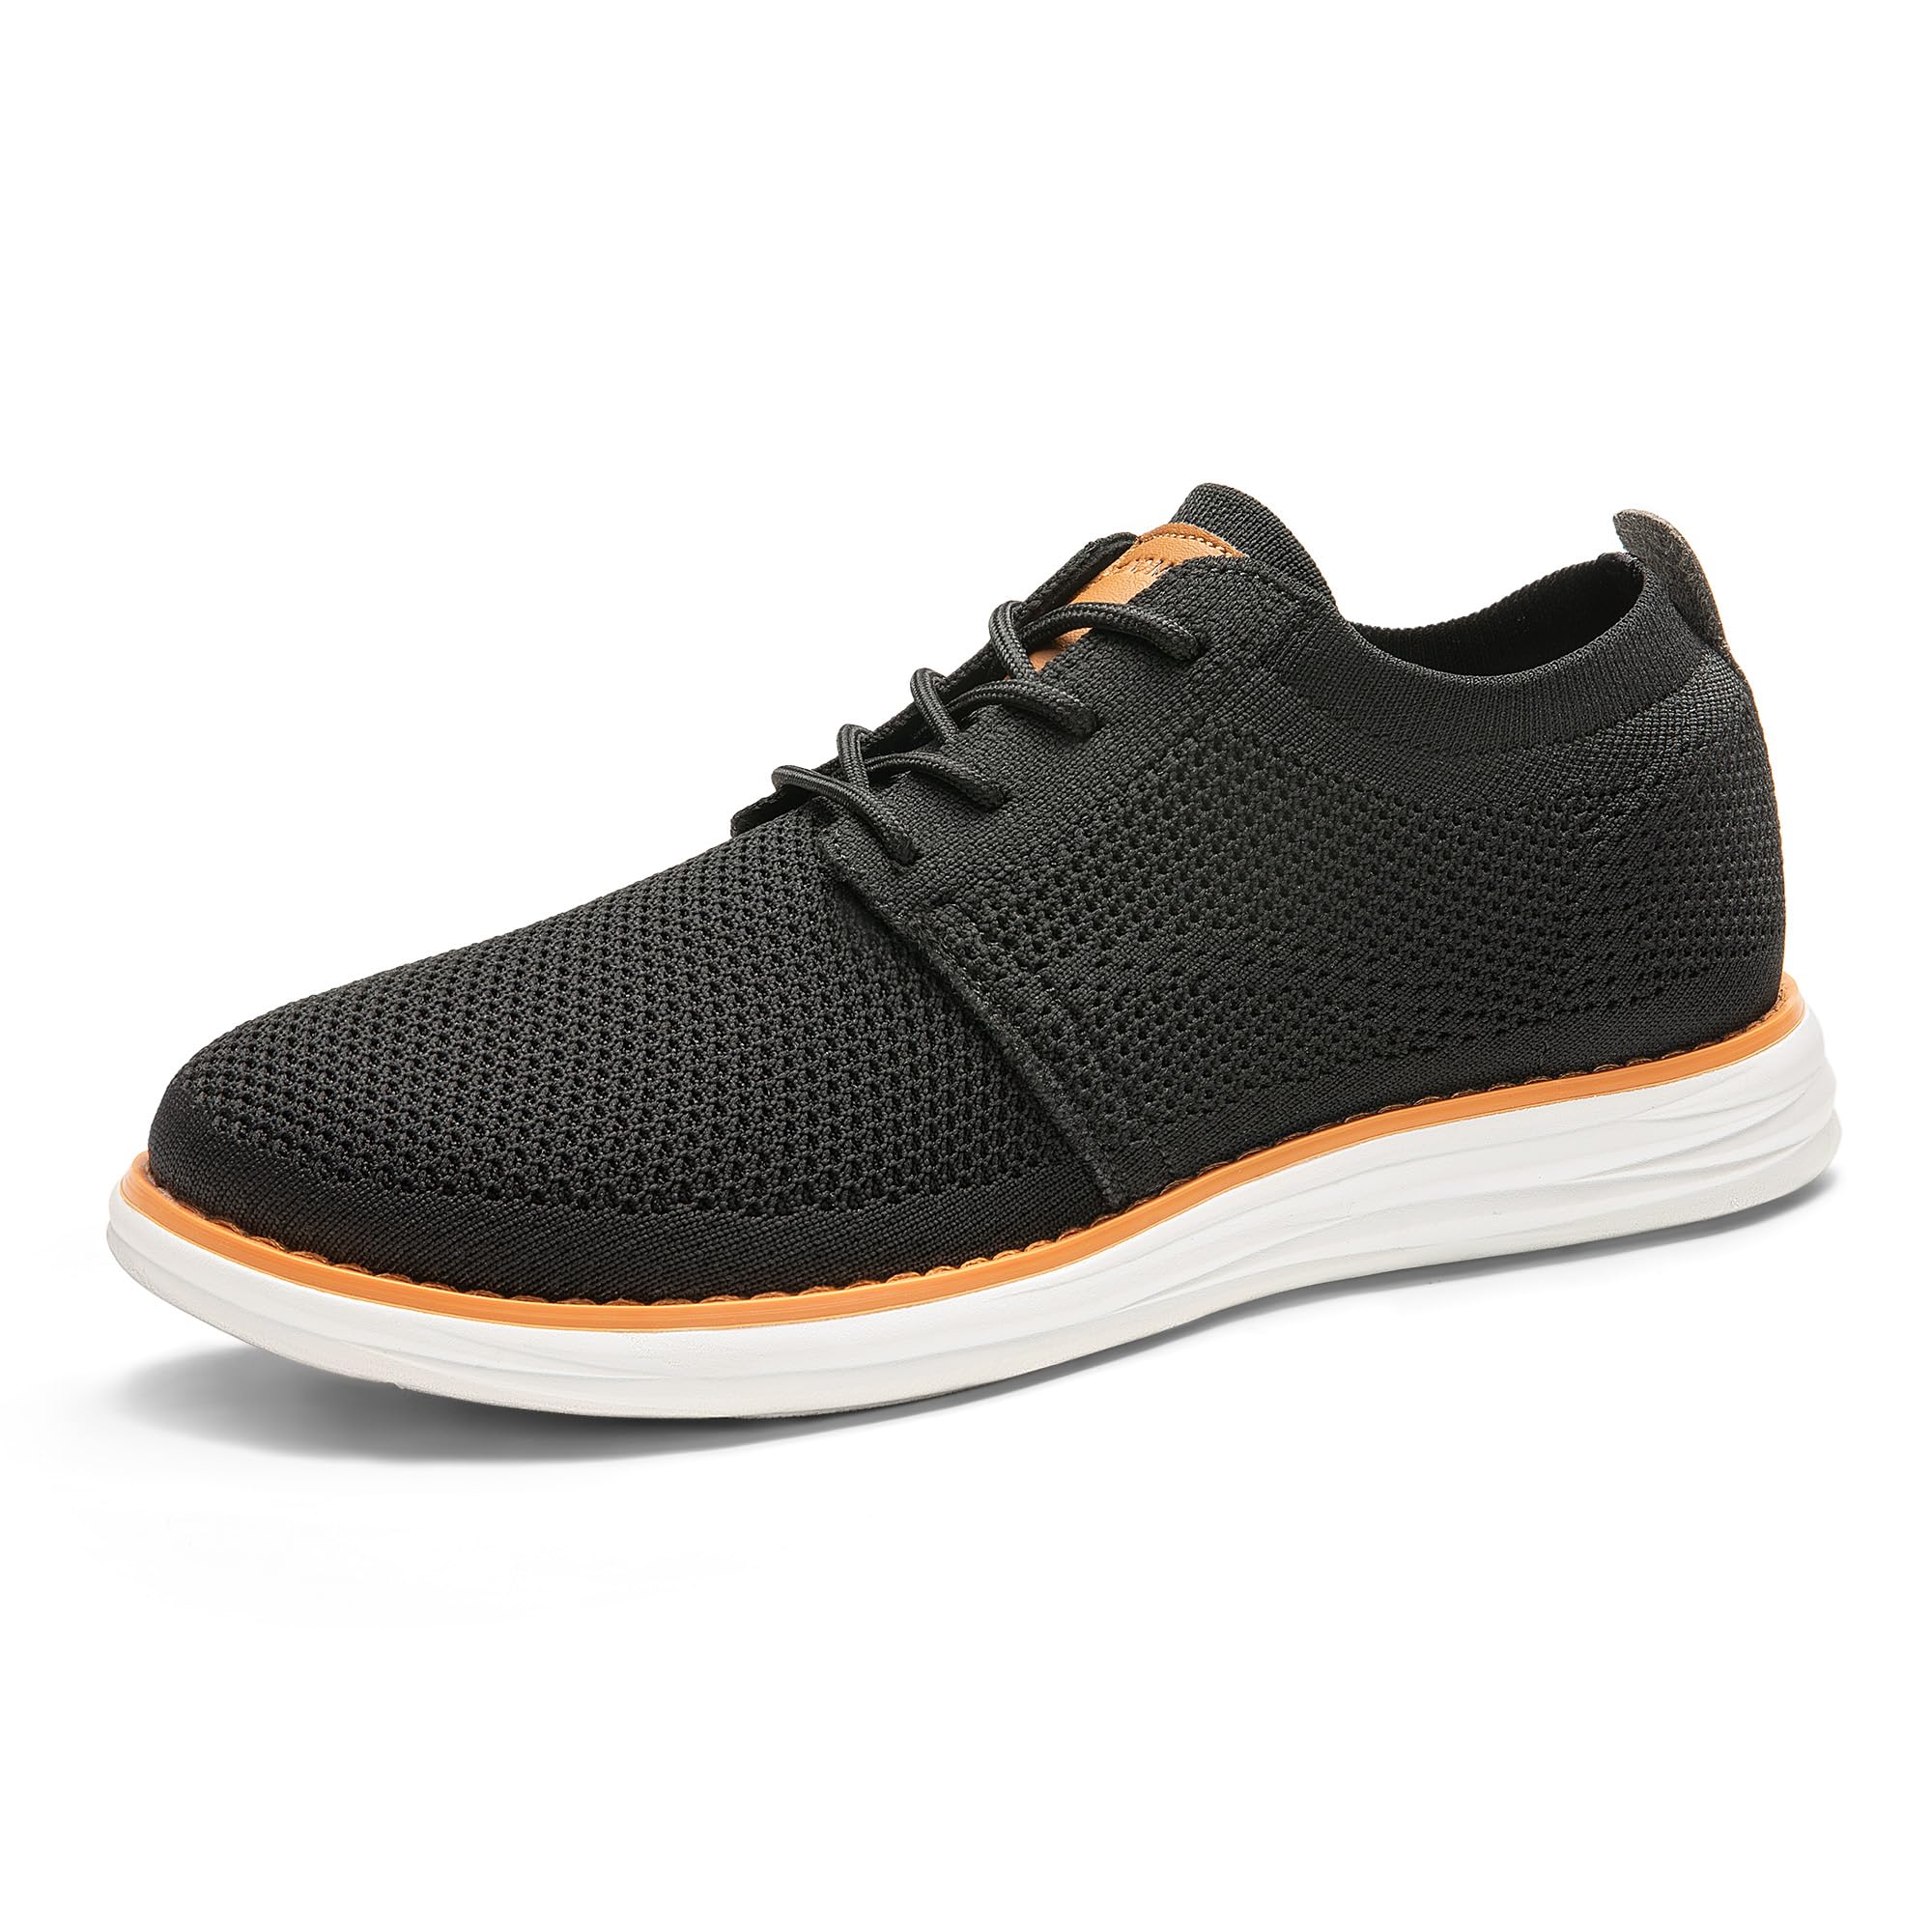 Bruno Marc Mens AirEaseⅠ Mesh Sneakers Oxfords Lace-Up Lightweight Casual Walking Shoes, 1/Black - 10.5(Grand-01)